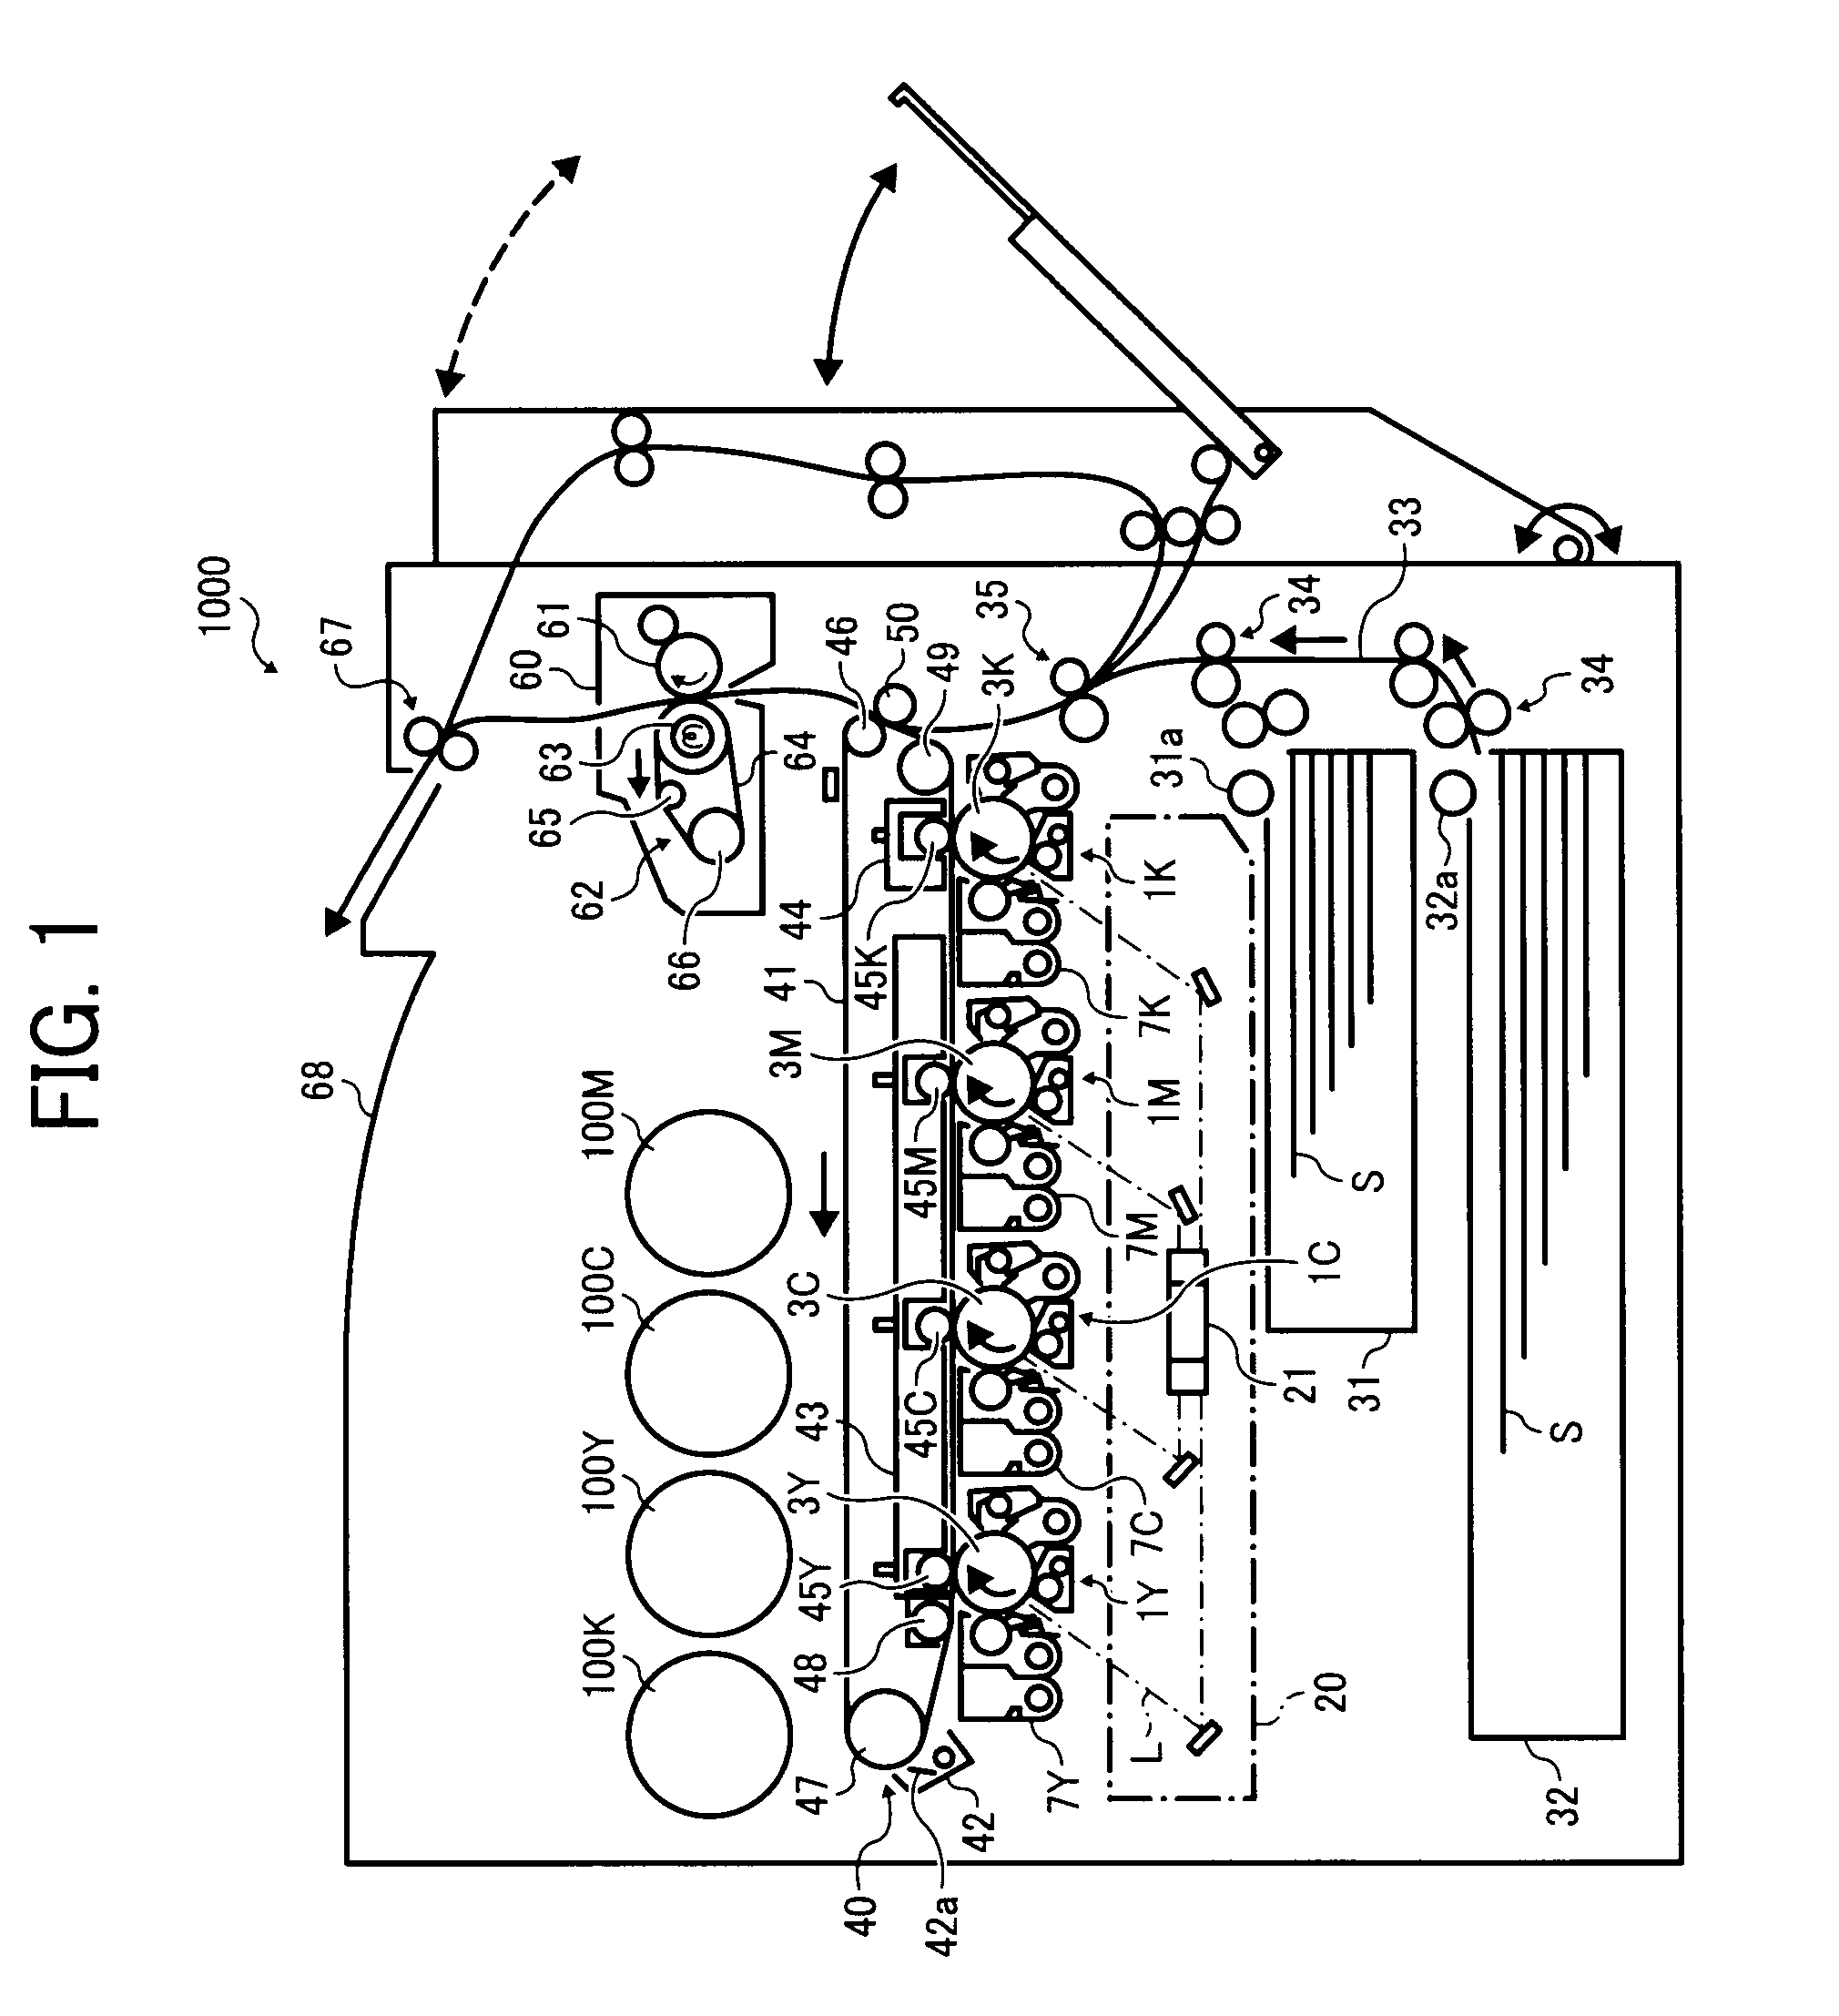 Image forming apparatus and image forming method performed by the image forming apparatus